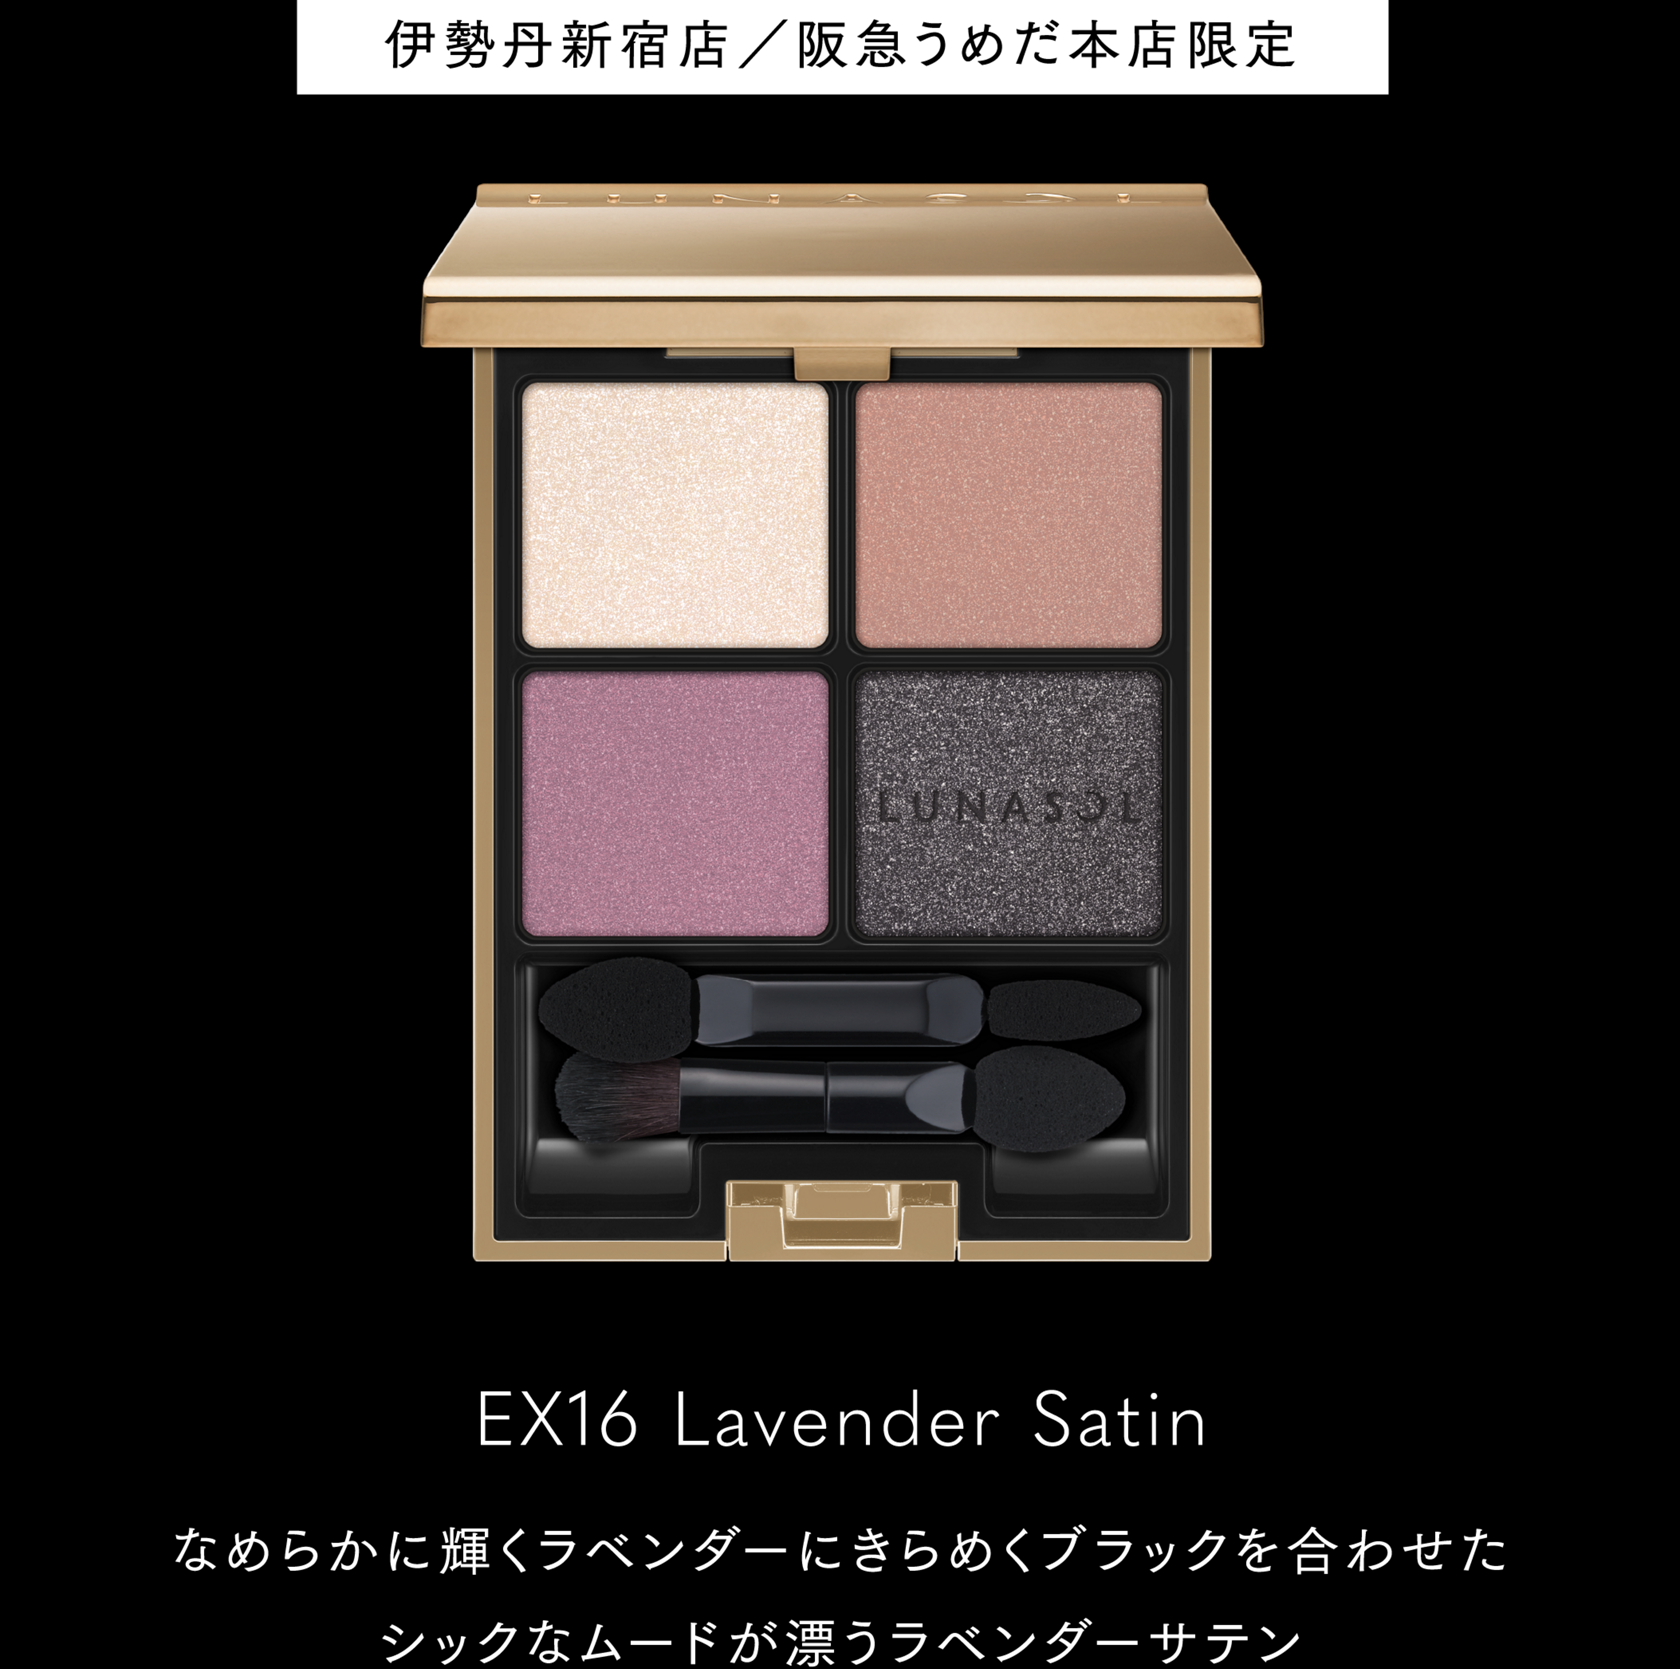 Couturiere Limited Edition ルナソル